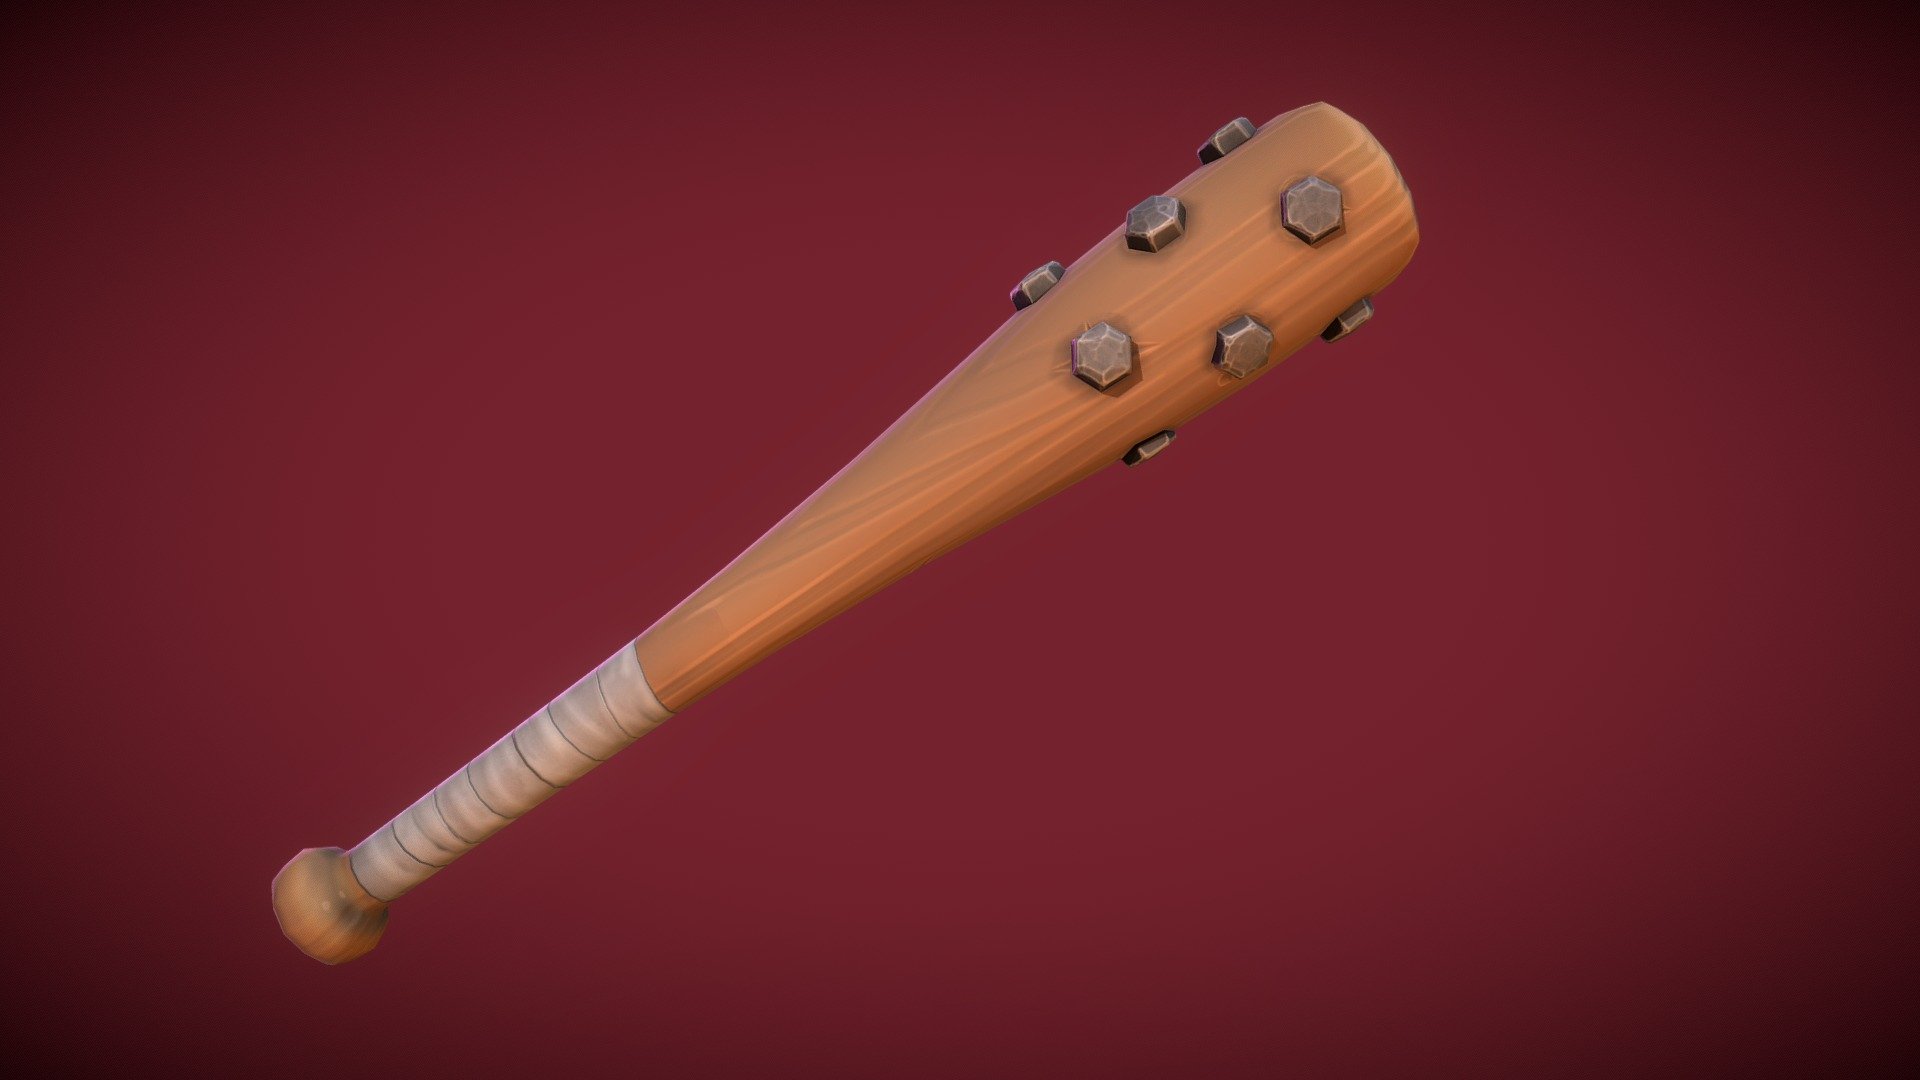 Stylized Low Poly Baseball Bat!

This is a Low Poly Stylized Baseball Bat as seen on the preview images.
Hand Painted details with PBR Metal for a timeless stylized look.
Includes PBR Metal/Rough detail.
FBX included
Game Ready!

Meshes + Textures:
Poly Count: 385
Texture Maps: Diffuse/Colour, Normal, Roughness, Emissive
Texture Sizes included: - 2048 x 2048

Features:
Stylized hand painting texturing.
Clean mesh with no co-planar faces or isolated vertices.
No corrections or cleaning up needed.
Correctly named in English.
Pivot at 0, 0, 0 at bottom center of object.

Unreal Engine
Tested in the Unreal Engine.
Created to UE4 Scale.
Pivot point placed for easy drag + drop in engine.
ORM maps included for correct Unreal engine material setup 3d model